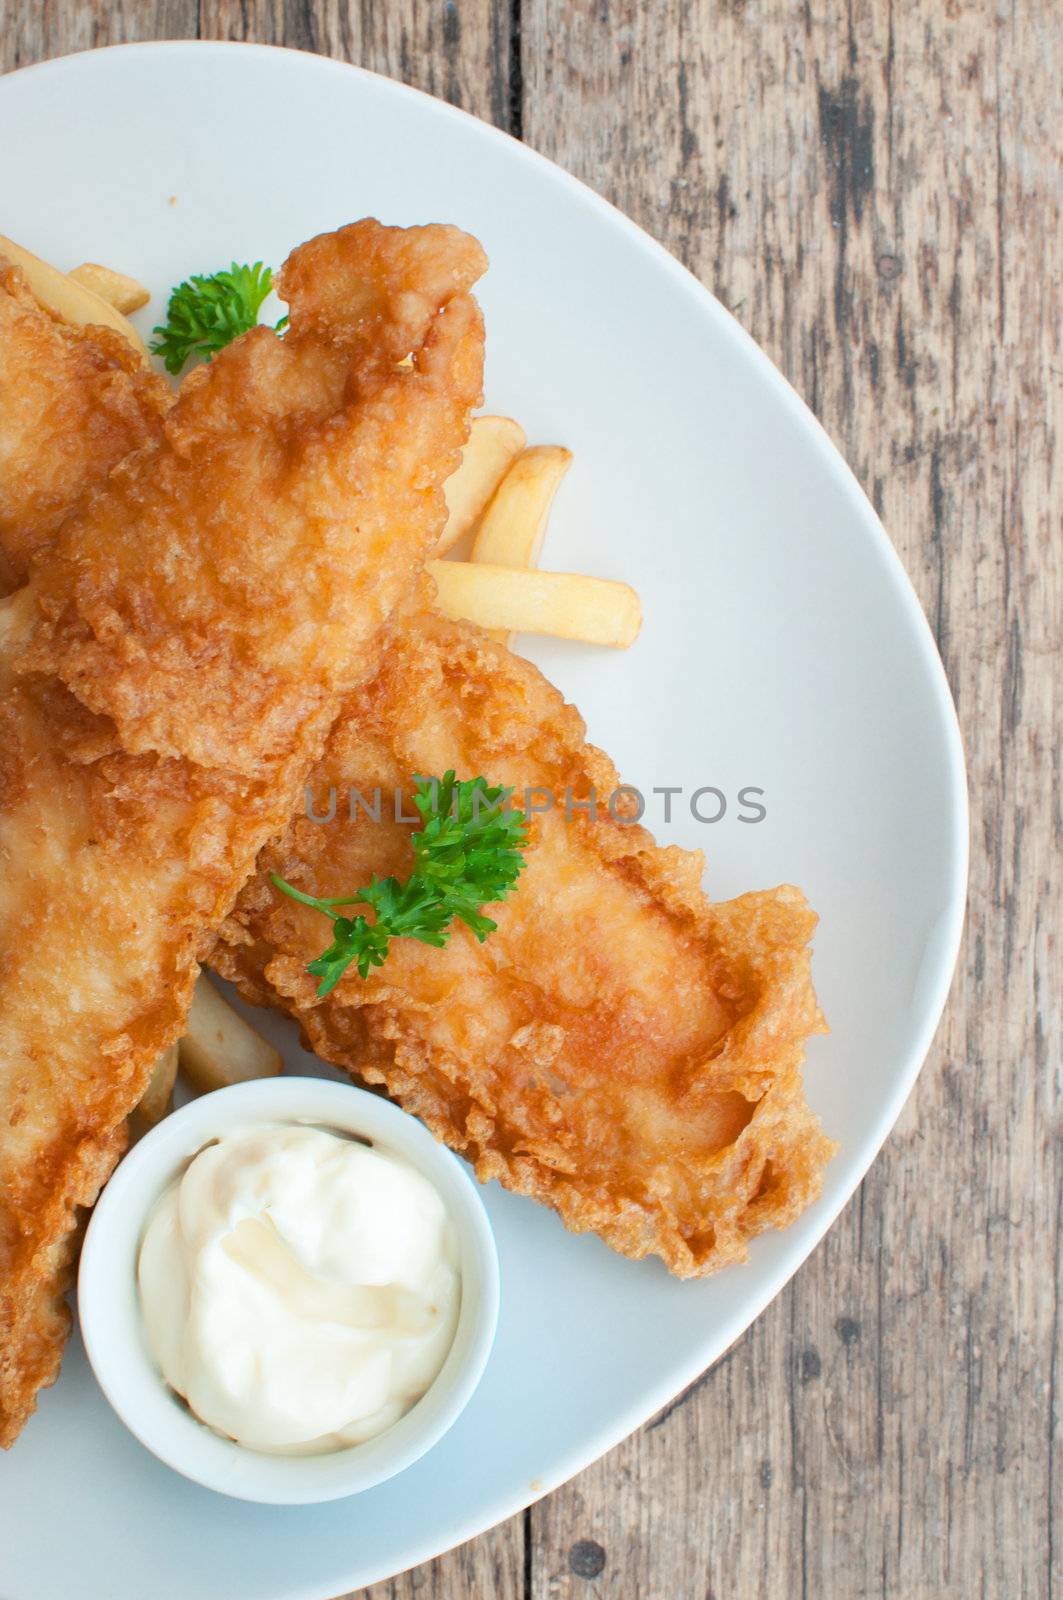 Two battered fish fillets on a plate with chips and mayonnaise